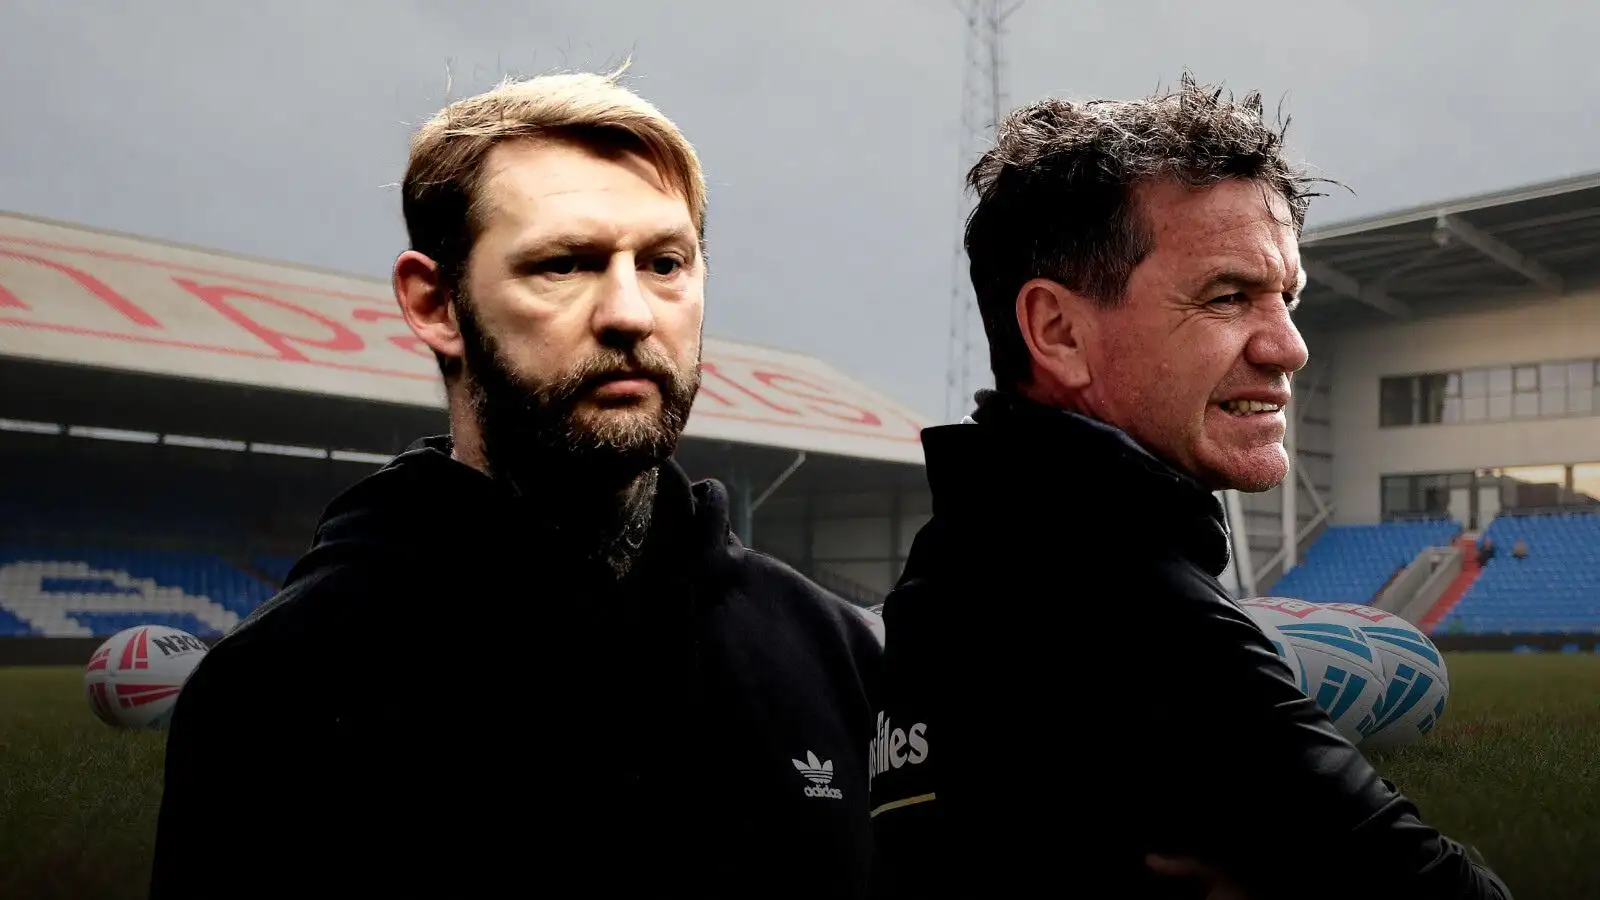 Inside how Mike Ford, Sean Long are bidding to bring back Oldham’s glory days